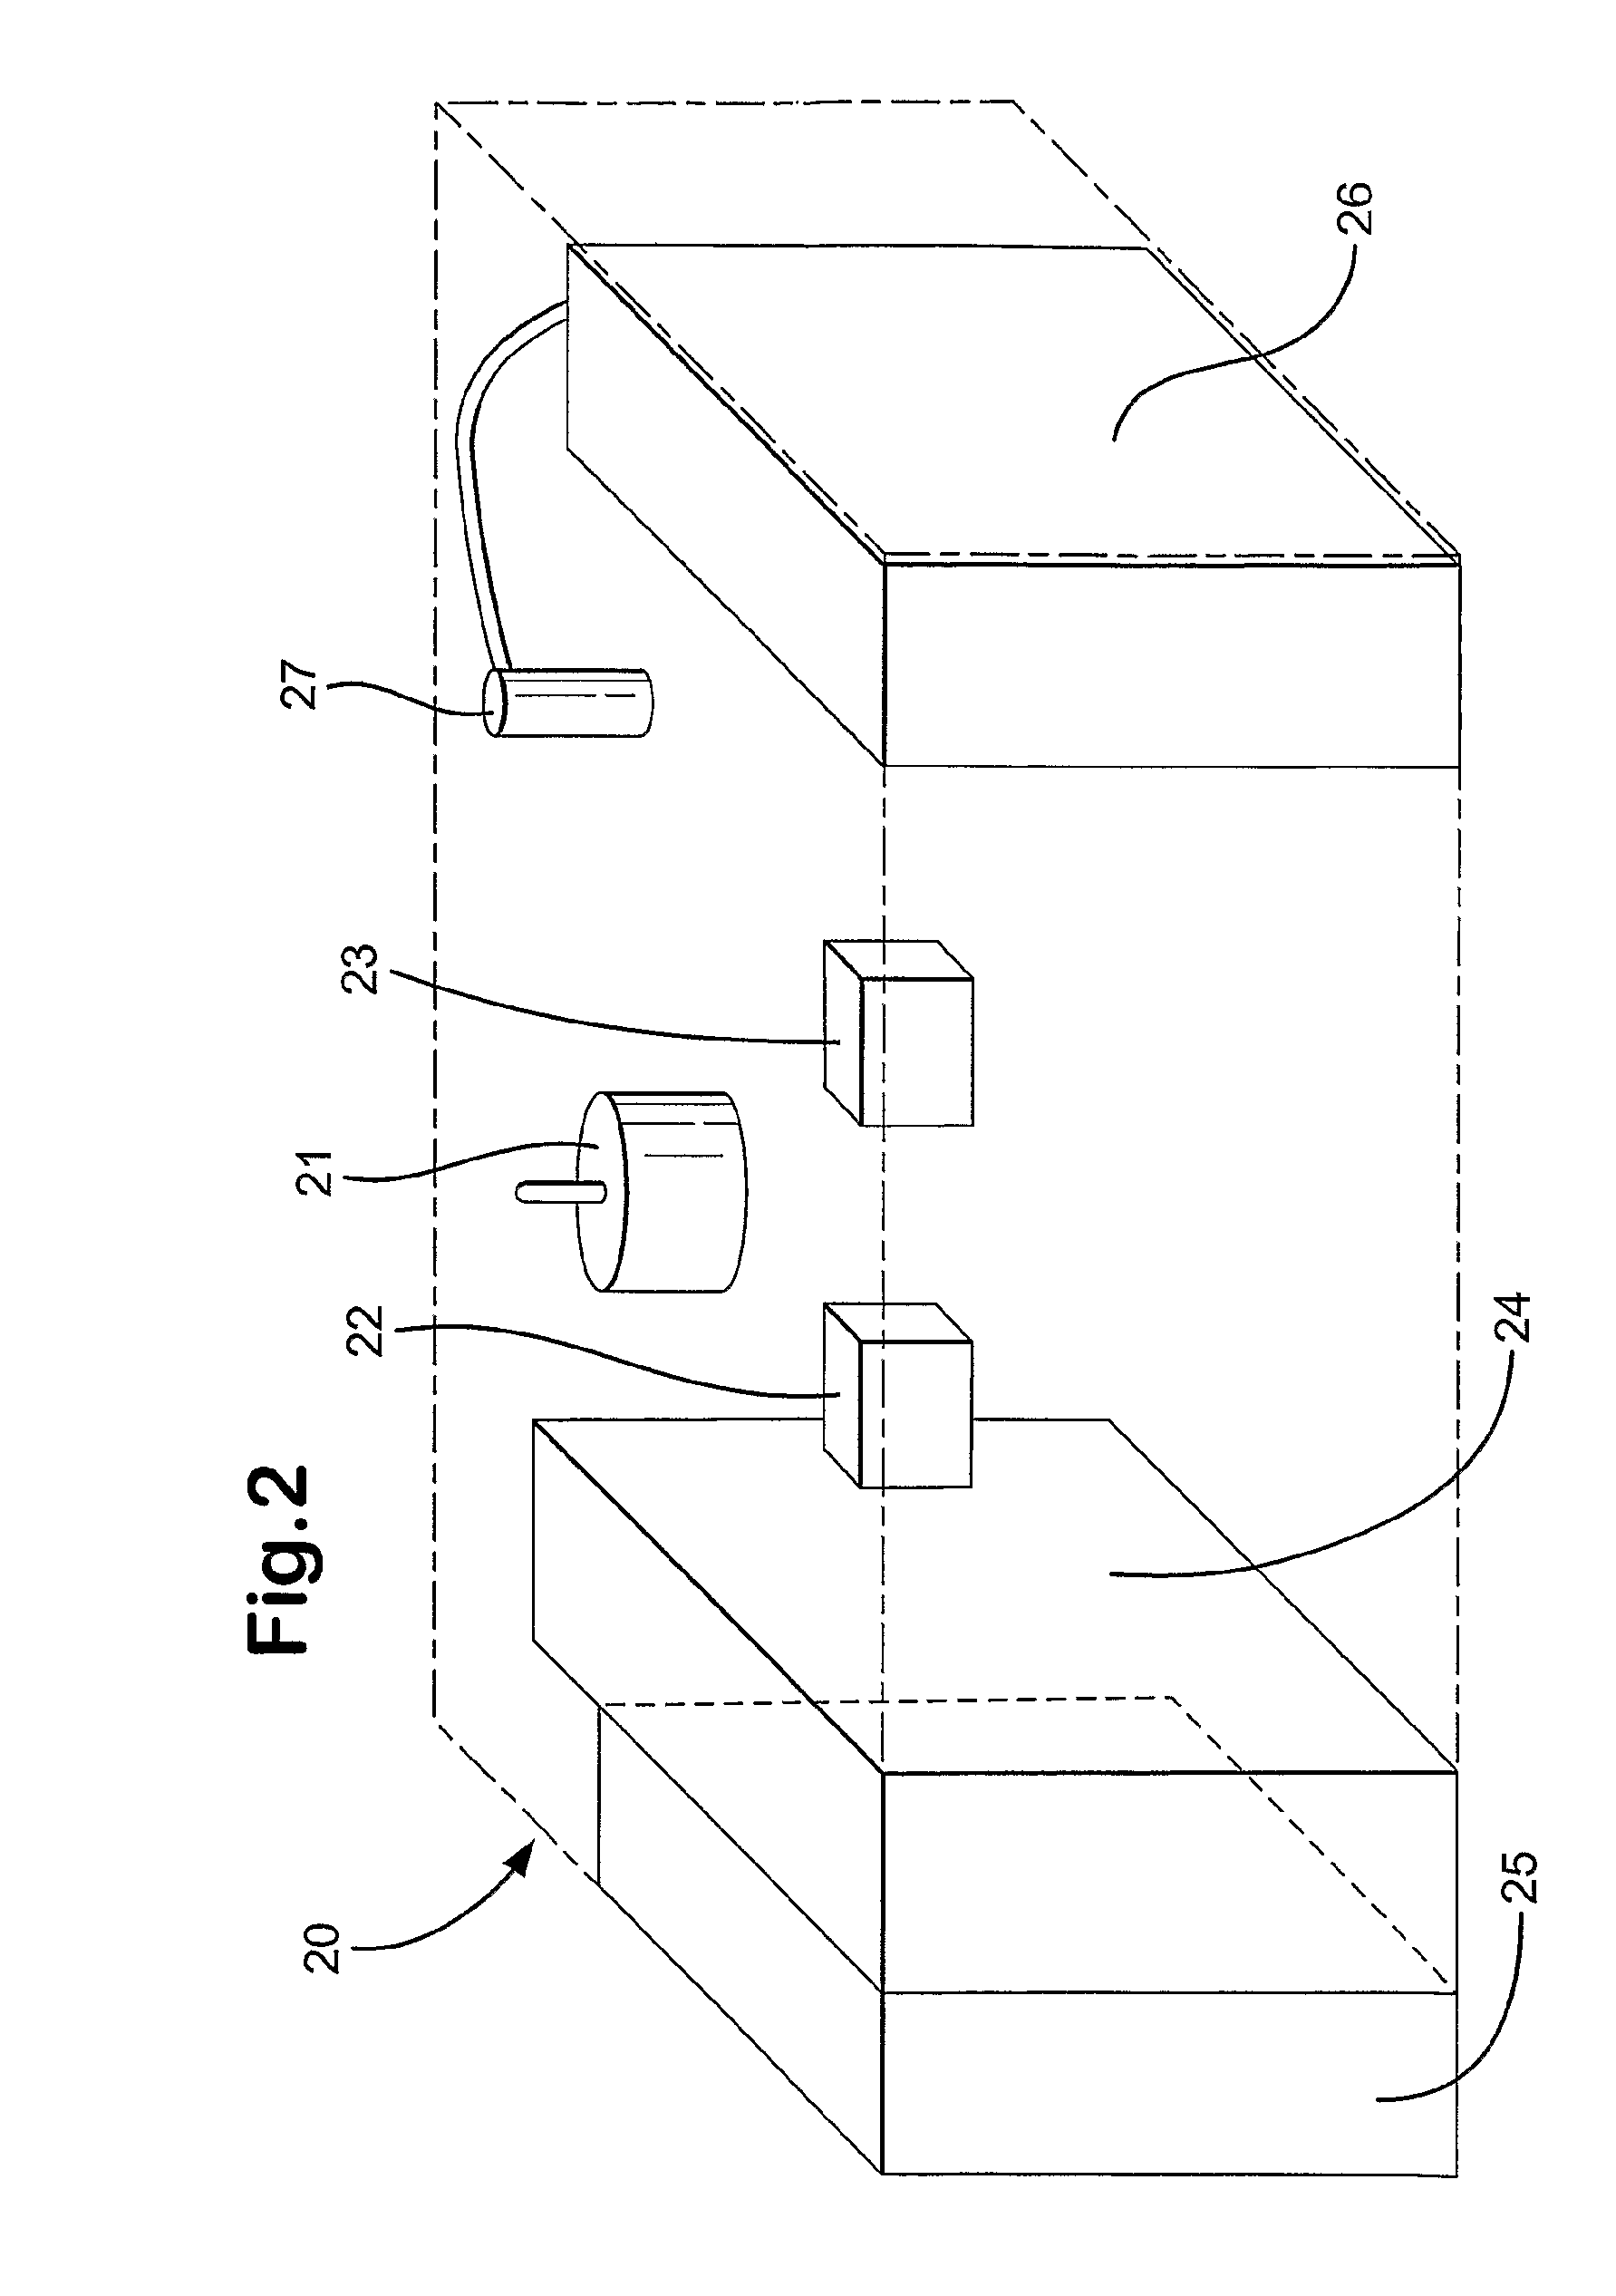 Sample plate for fluid analysis in a refinery process